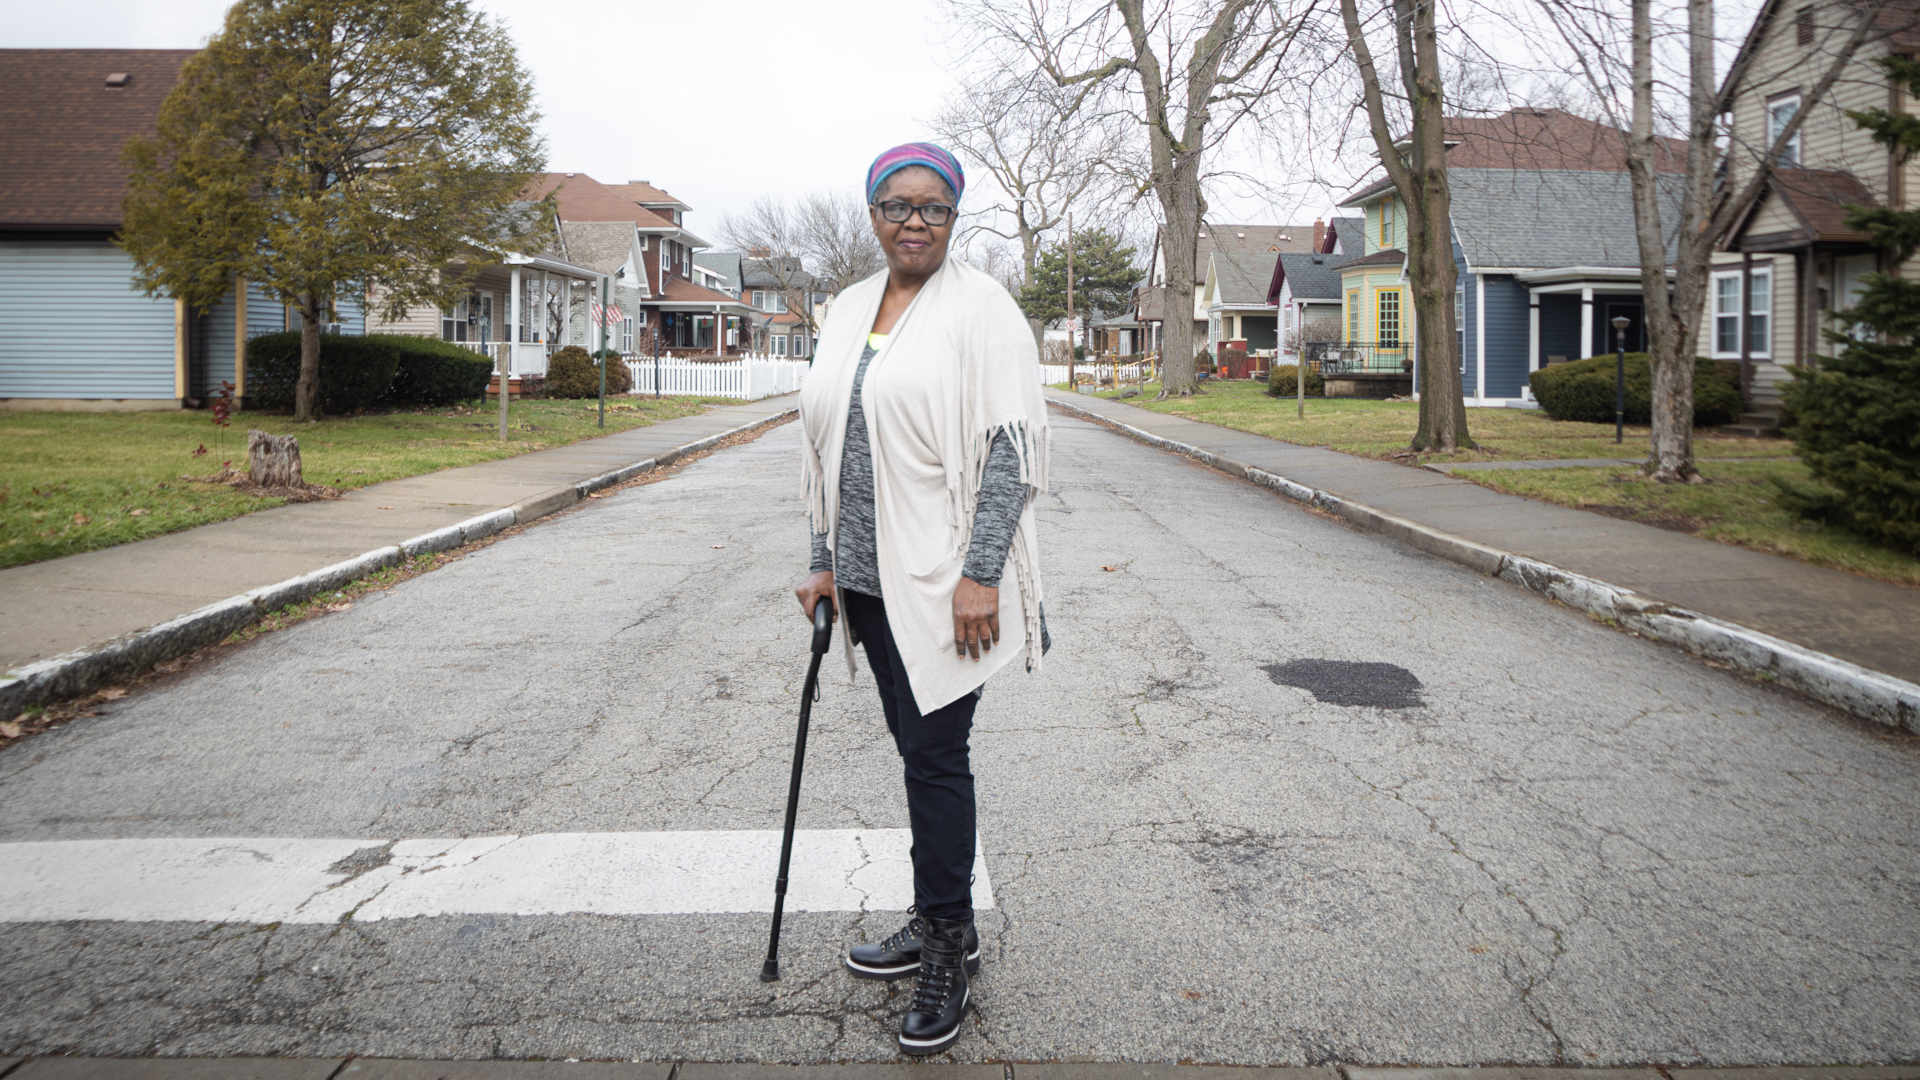 Paula Brooks, a resident of the Ransom Place neighborhood in Indianapolis, is affected by traffic pollution from a nearby highway.  All photos by FAITH BLACKWELL for UNDARK